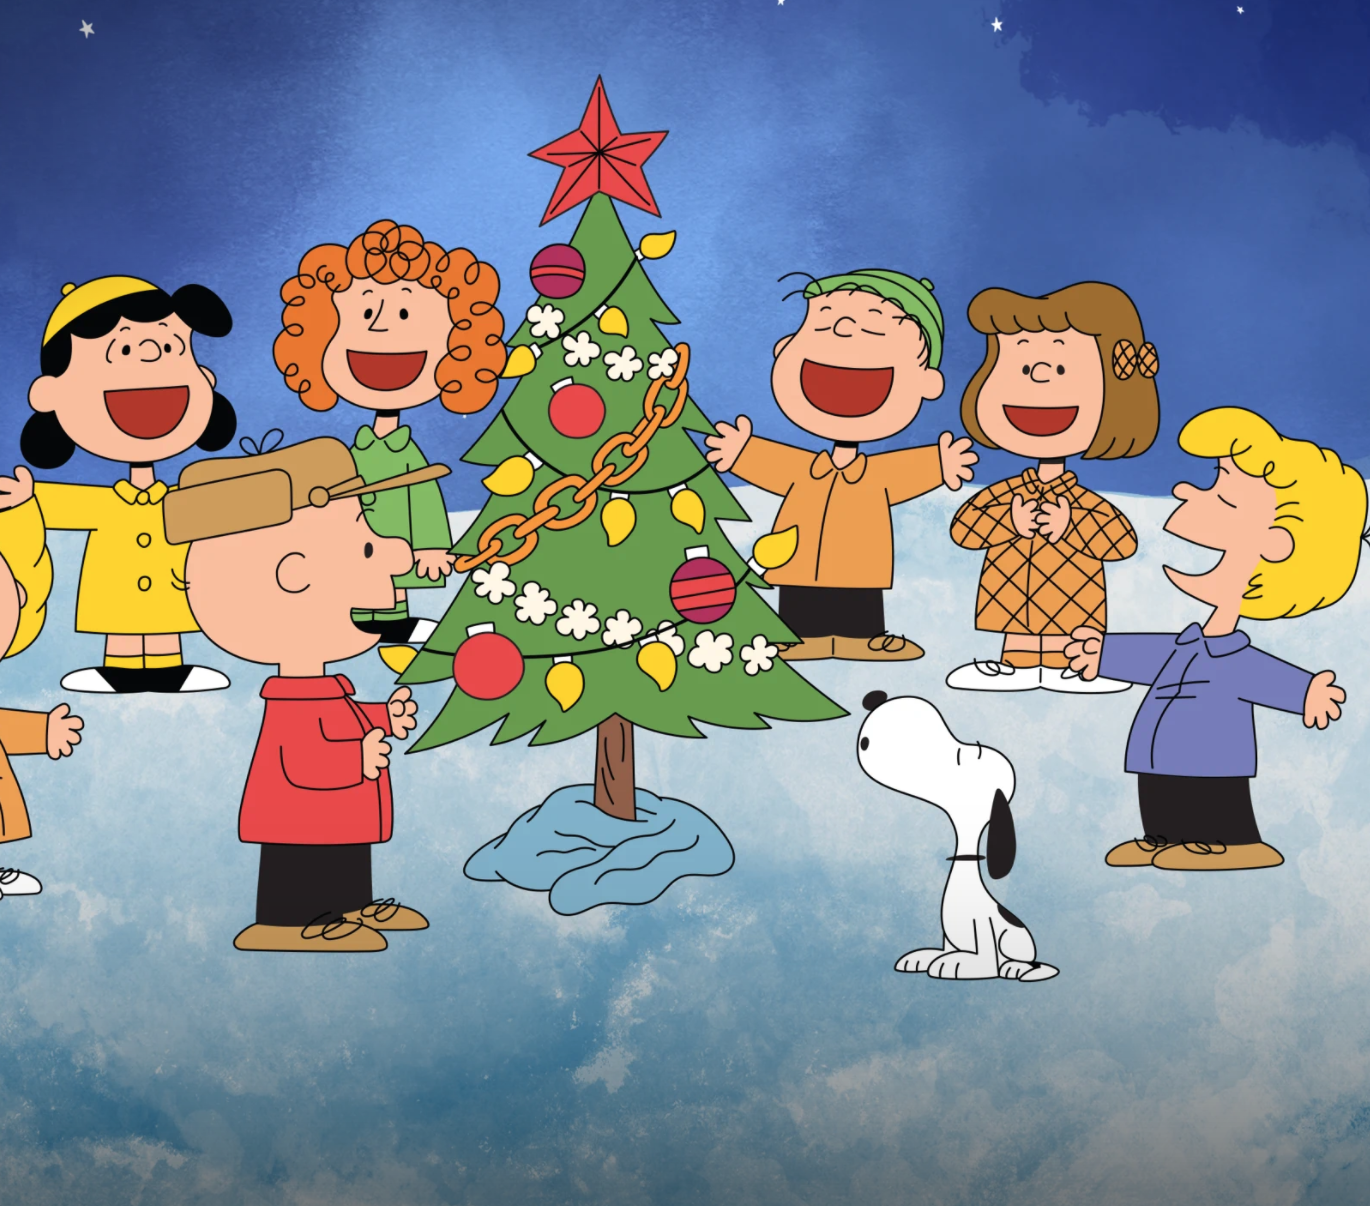 How to Watch and Stream 'A Charlie Brown Christmas' in 2022